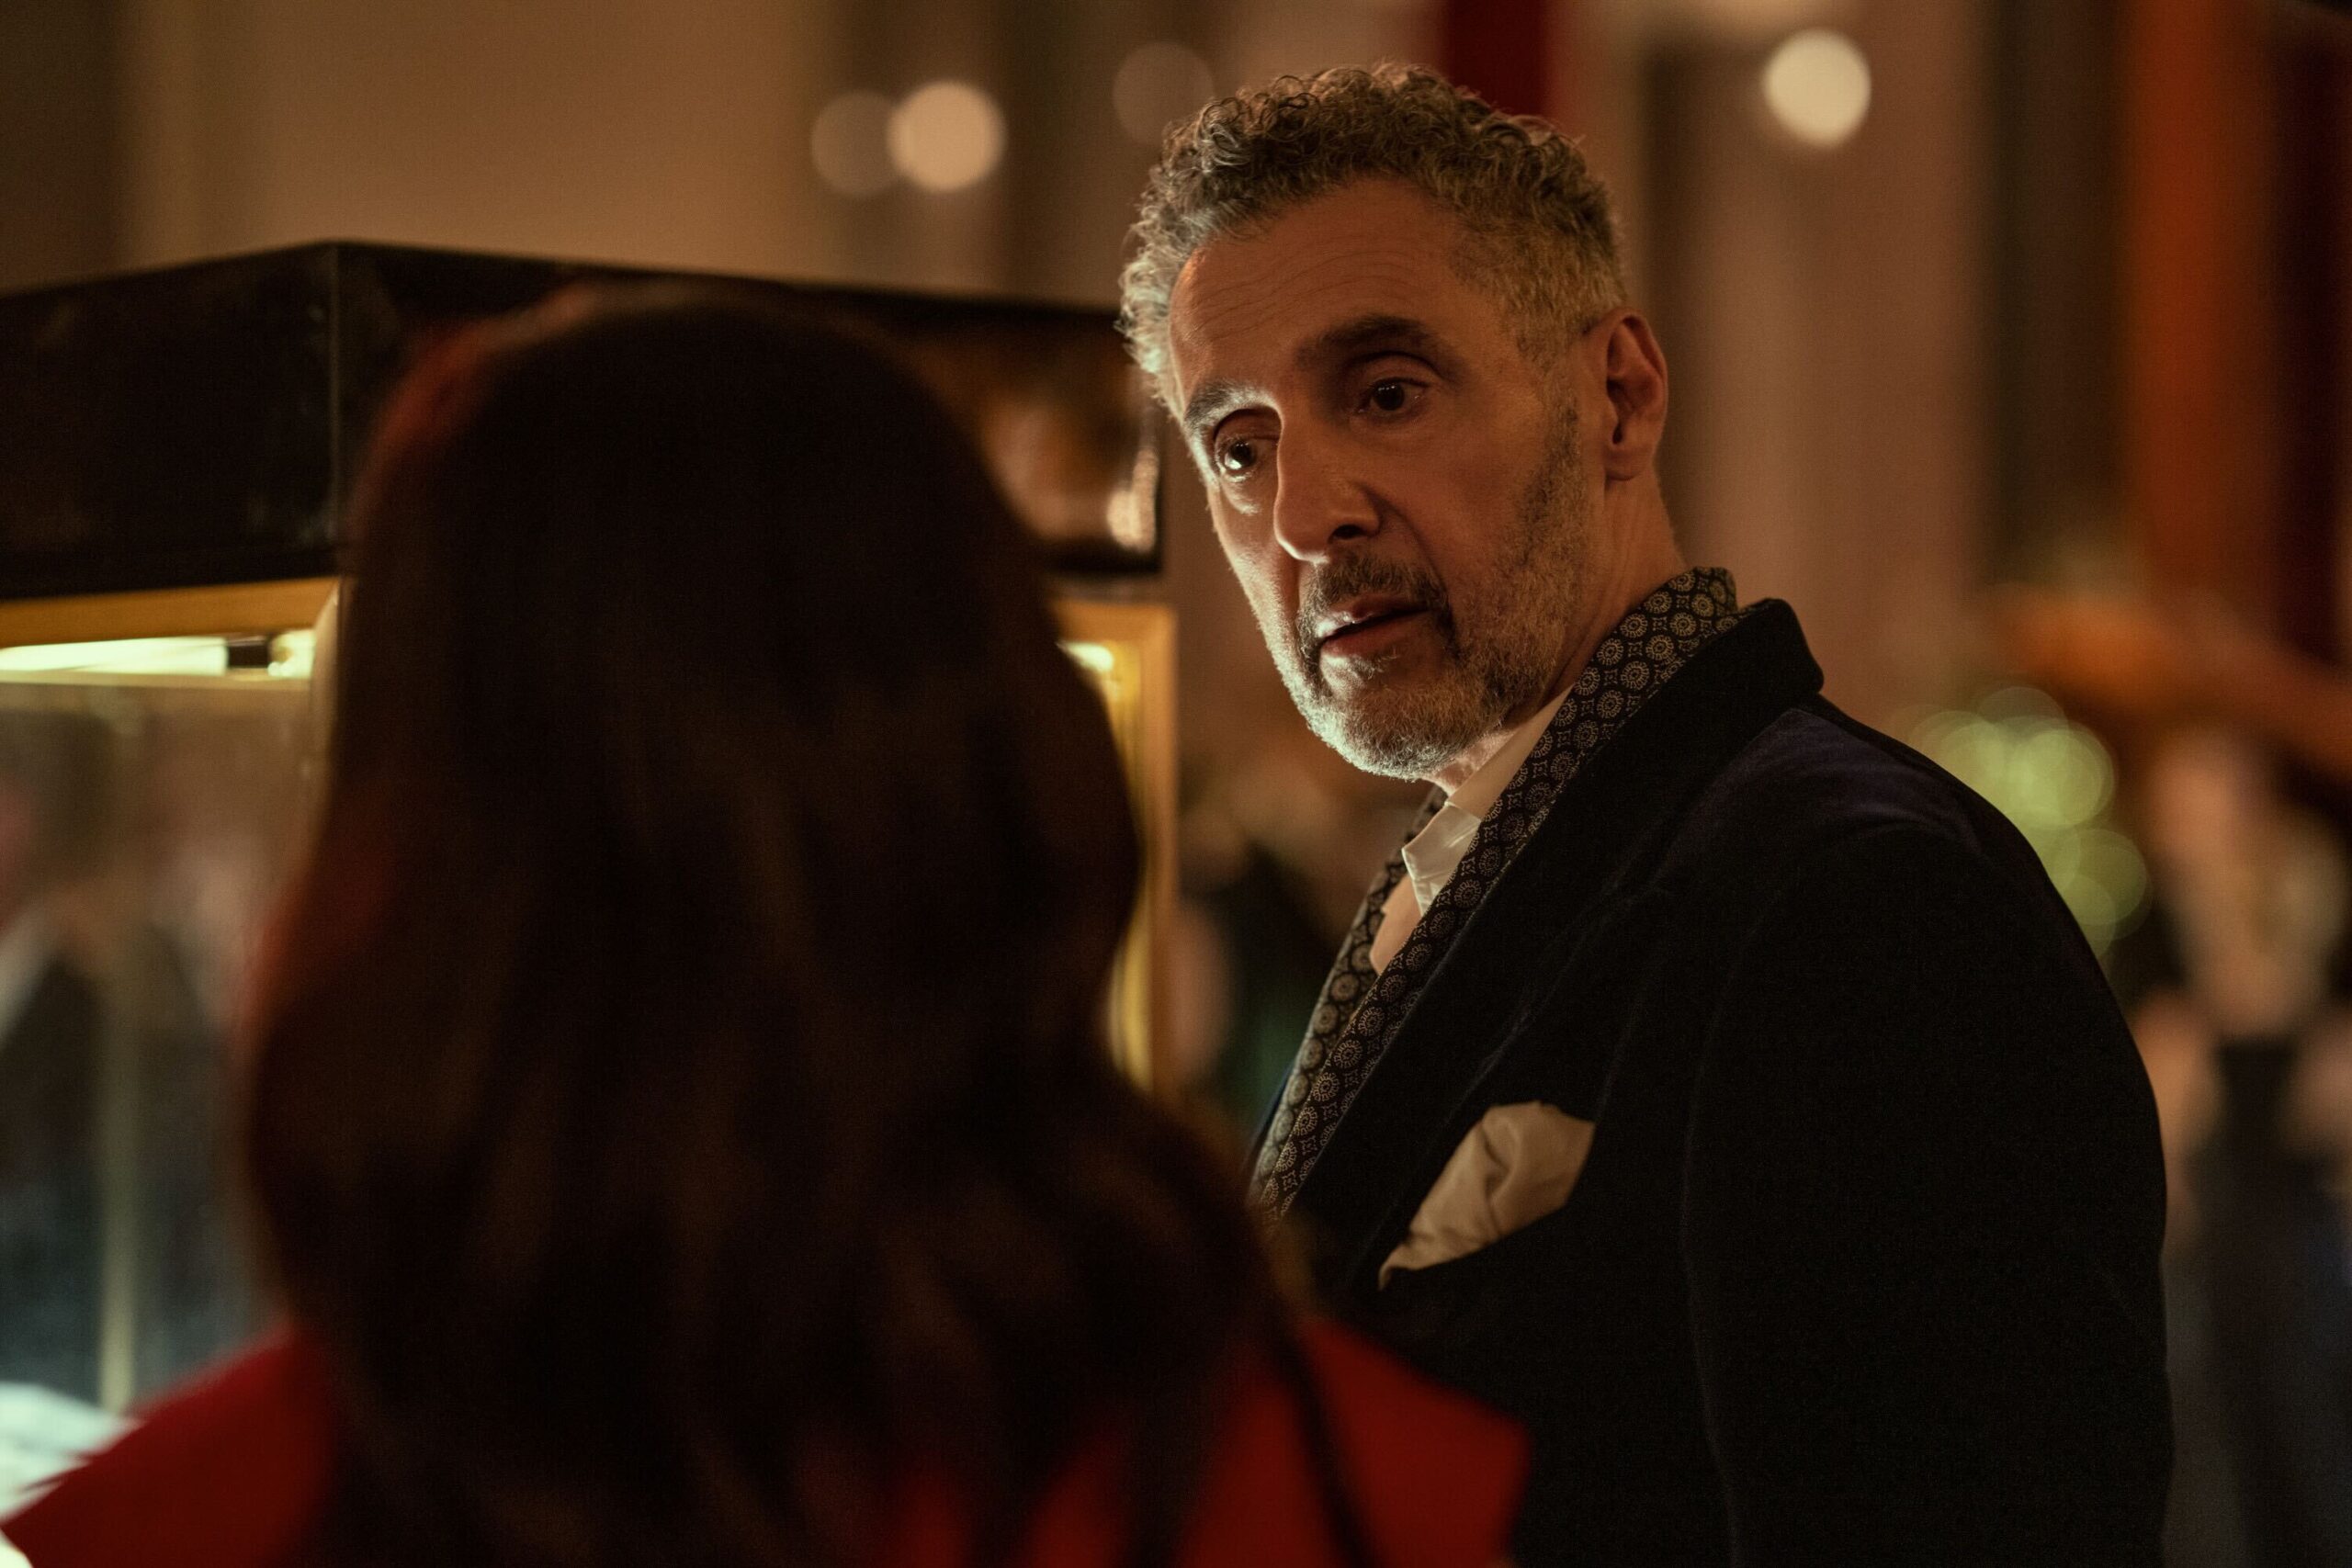 John Turturro in Donald Glover and Francesca Sloane's action comedy drama spy thriller adaptation series, Mr and Mrs Smith Season 1 Episode 2